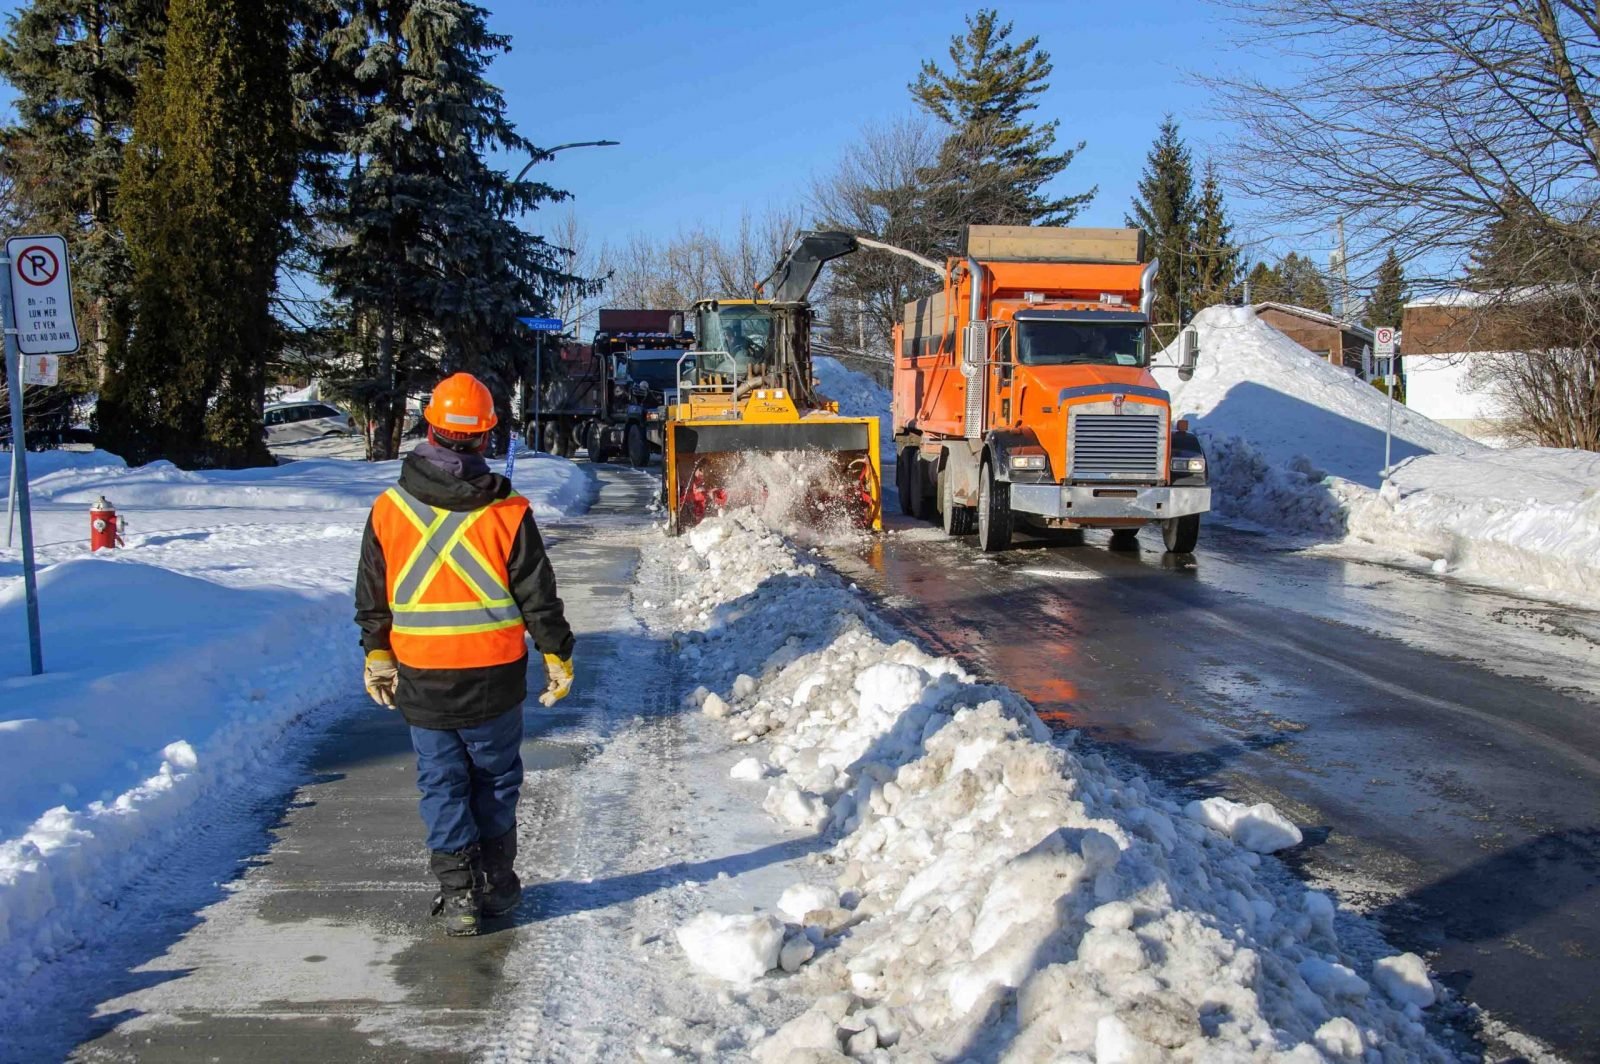 City of Laval says it’s ready for expected blizzard on Monday